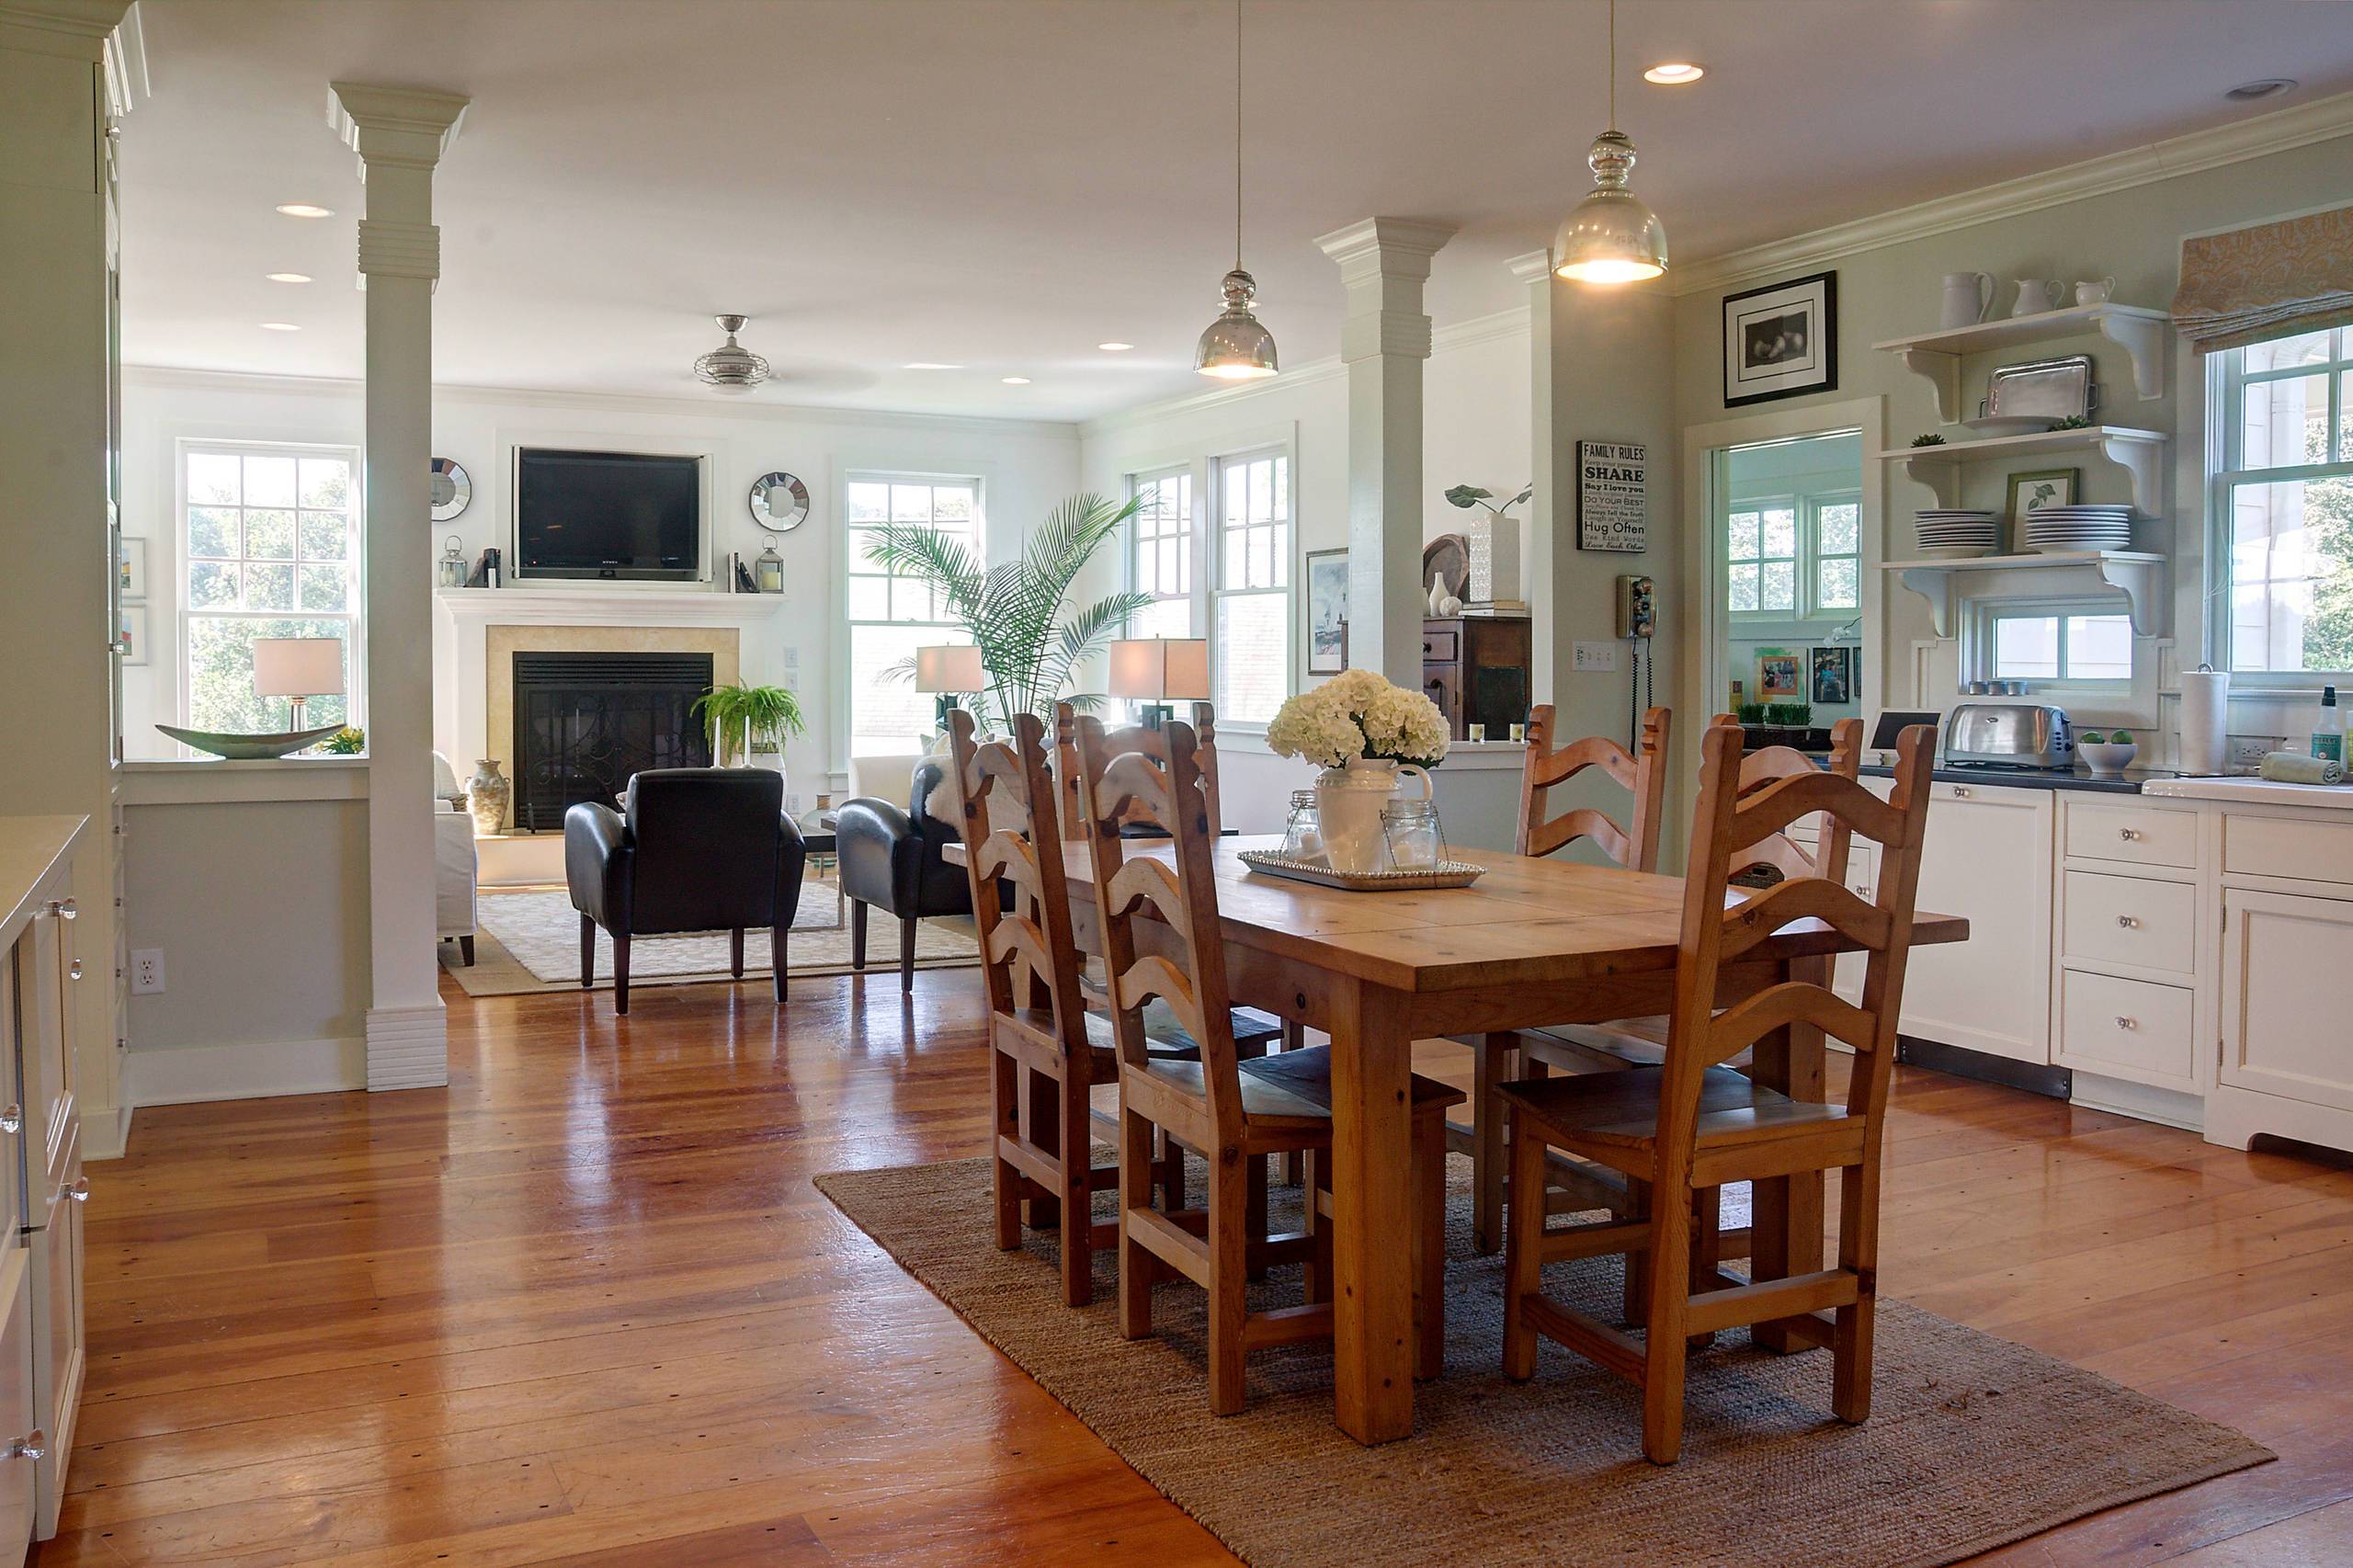 Vintage finds add personality to the space (from Houzz)